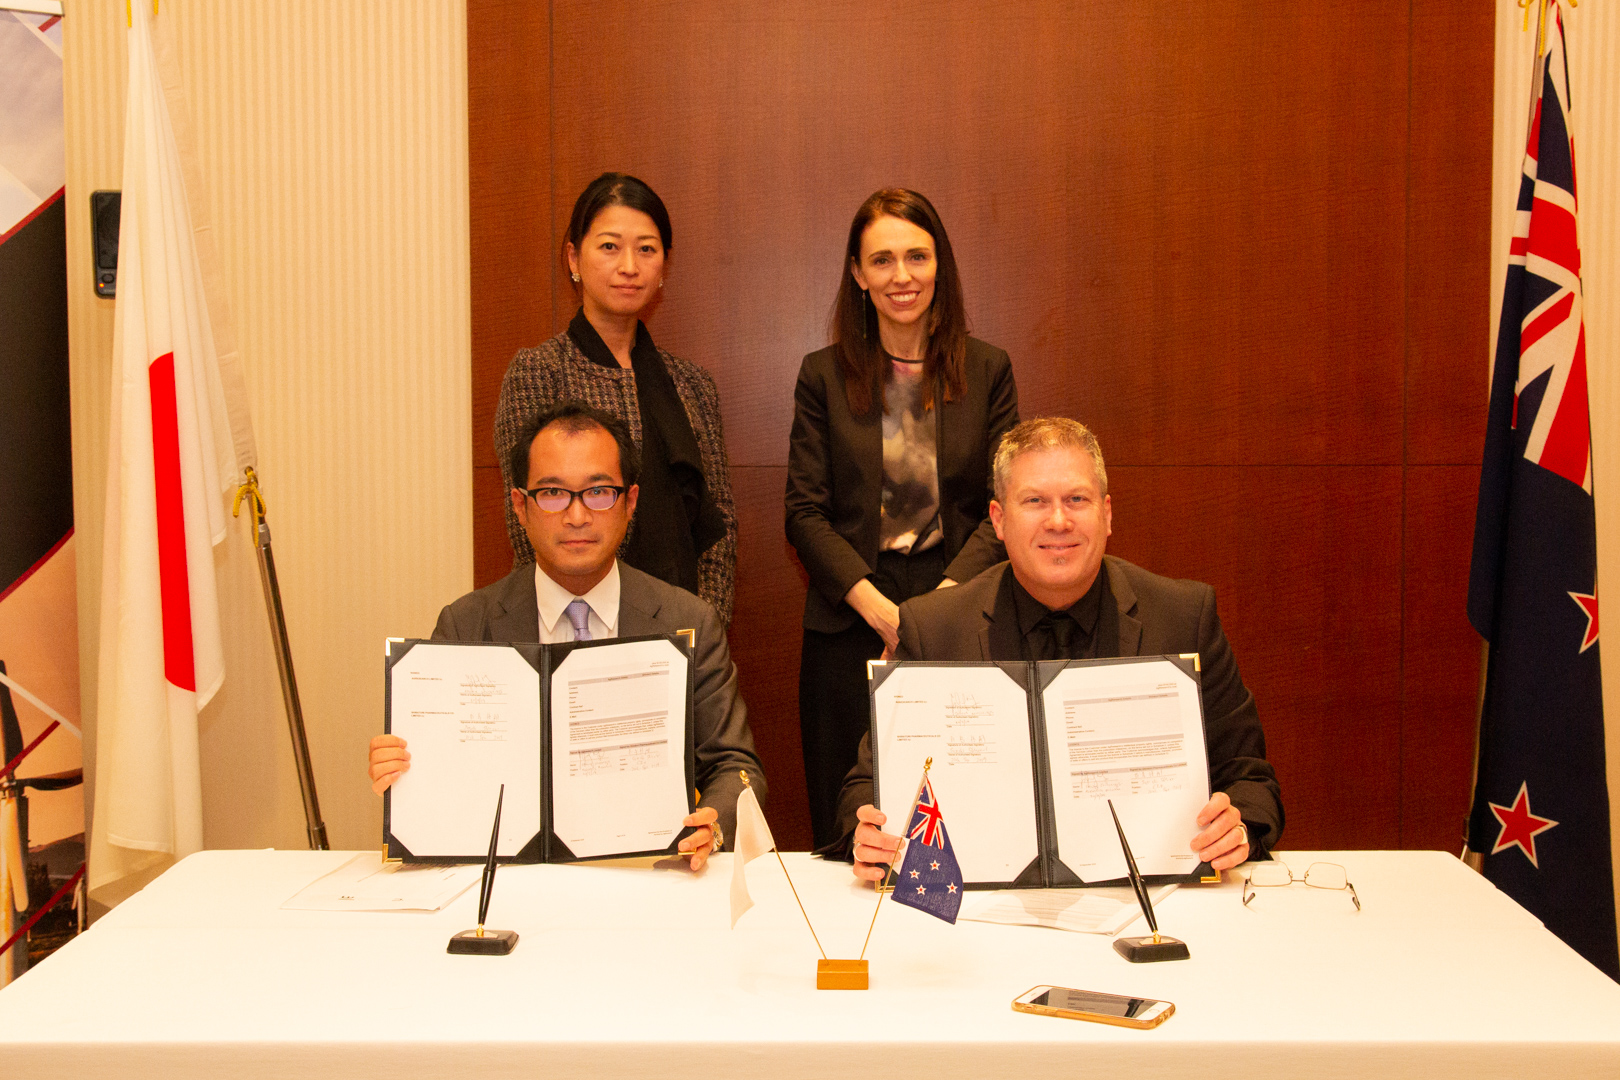 New Zealand Prime Minister Jacinda Ardern at the signing of a joint research partnership between Shiratori and AgResearch. Photo credit: AgResearch